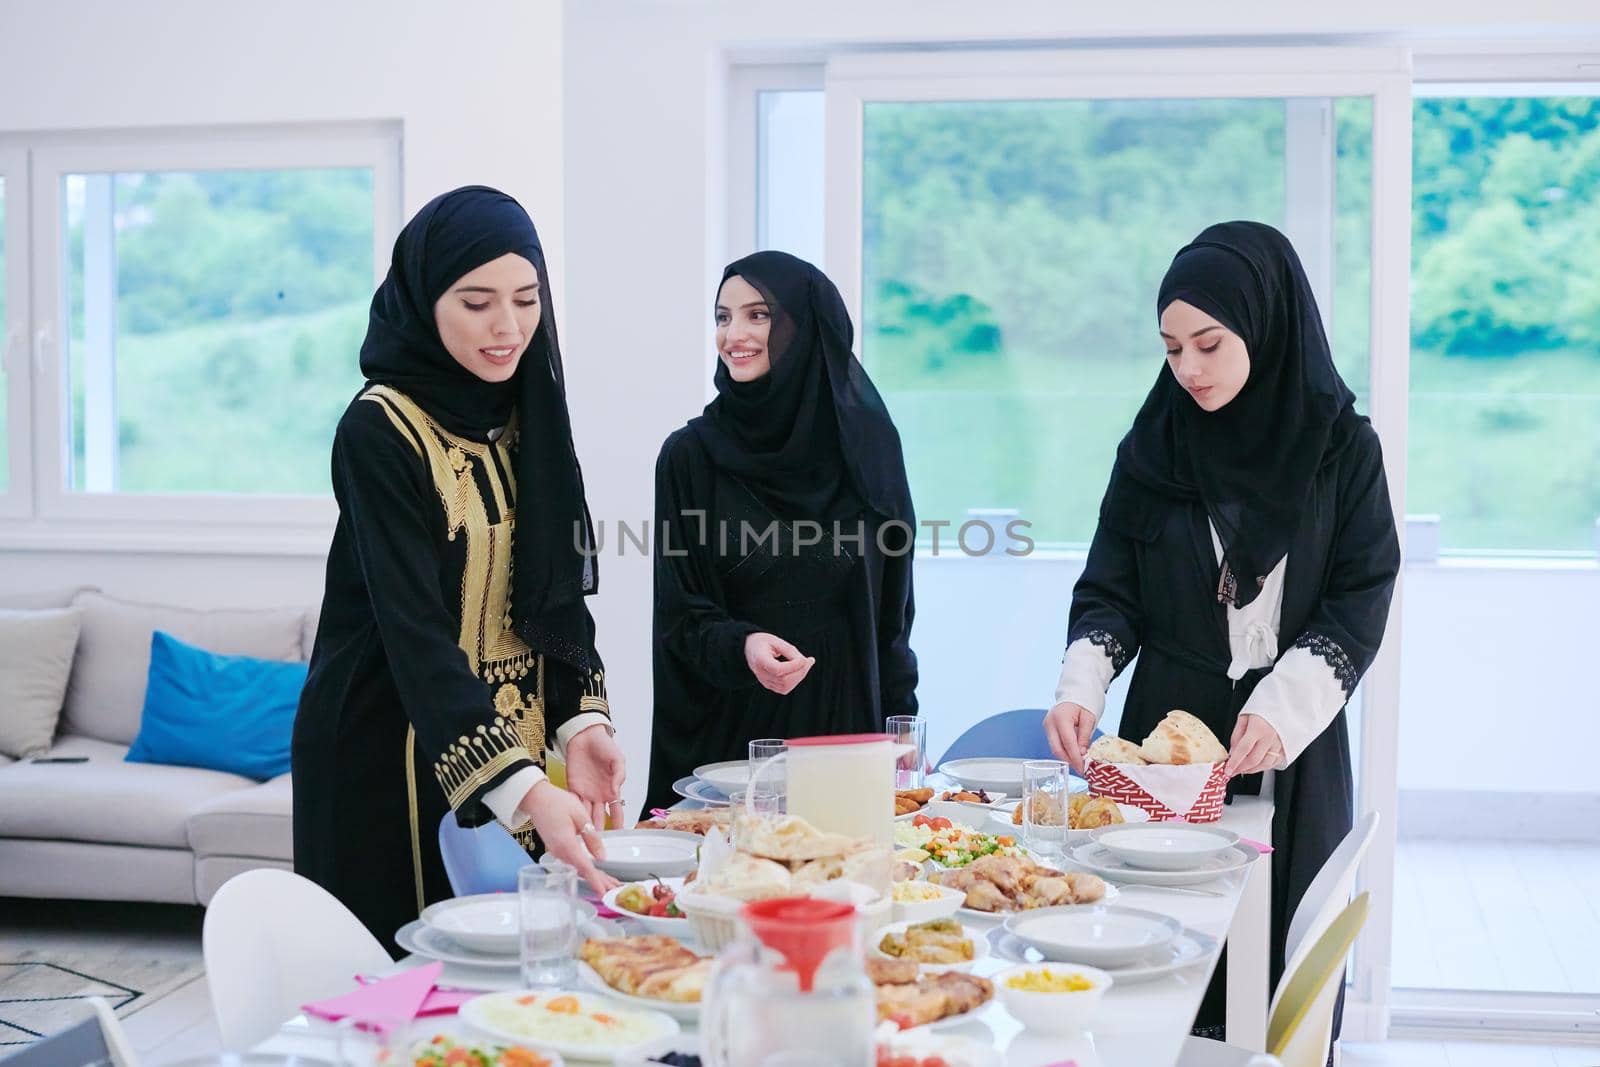 Eid Mubarak Muslim family having Iftar dinner  young muslim girls serving food on the table during Ramadan feasting month at home. The Islamic Halal Eating and Drinking Islamic family